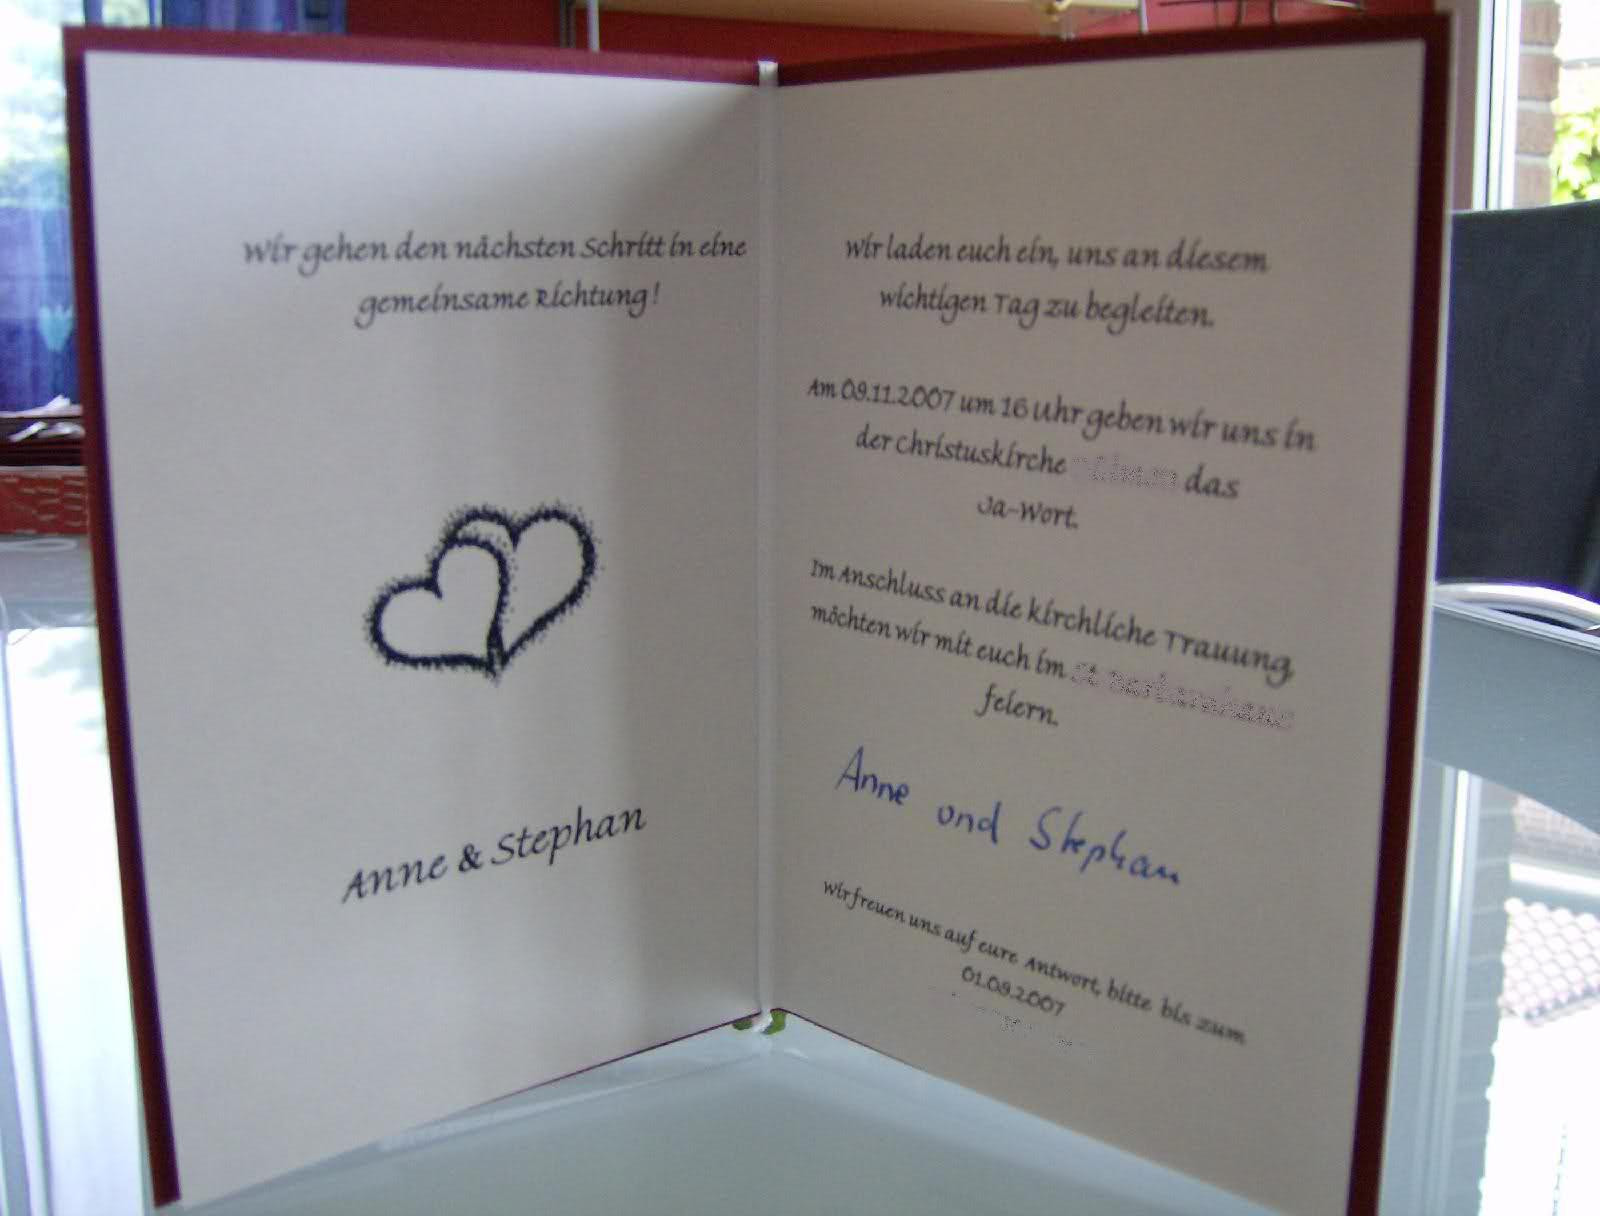 Einladungskarten Hochzeit
 Einladungskarten Hochzeit Text